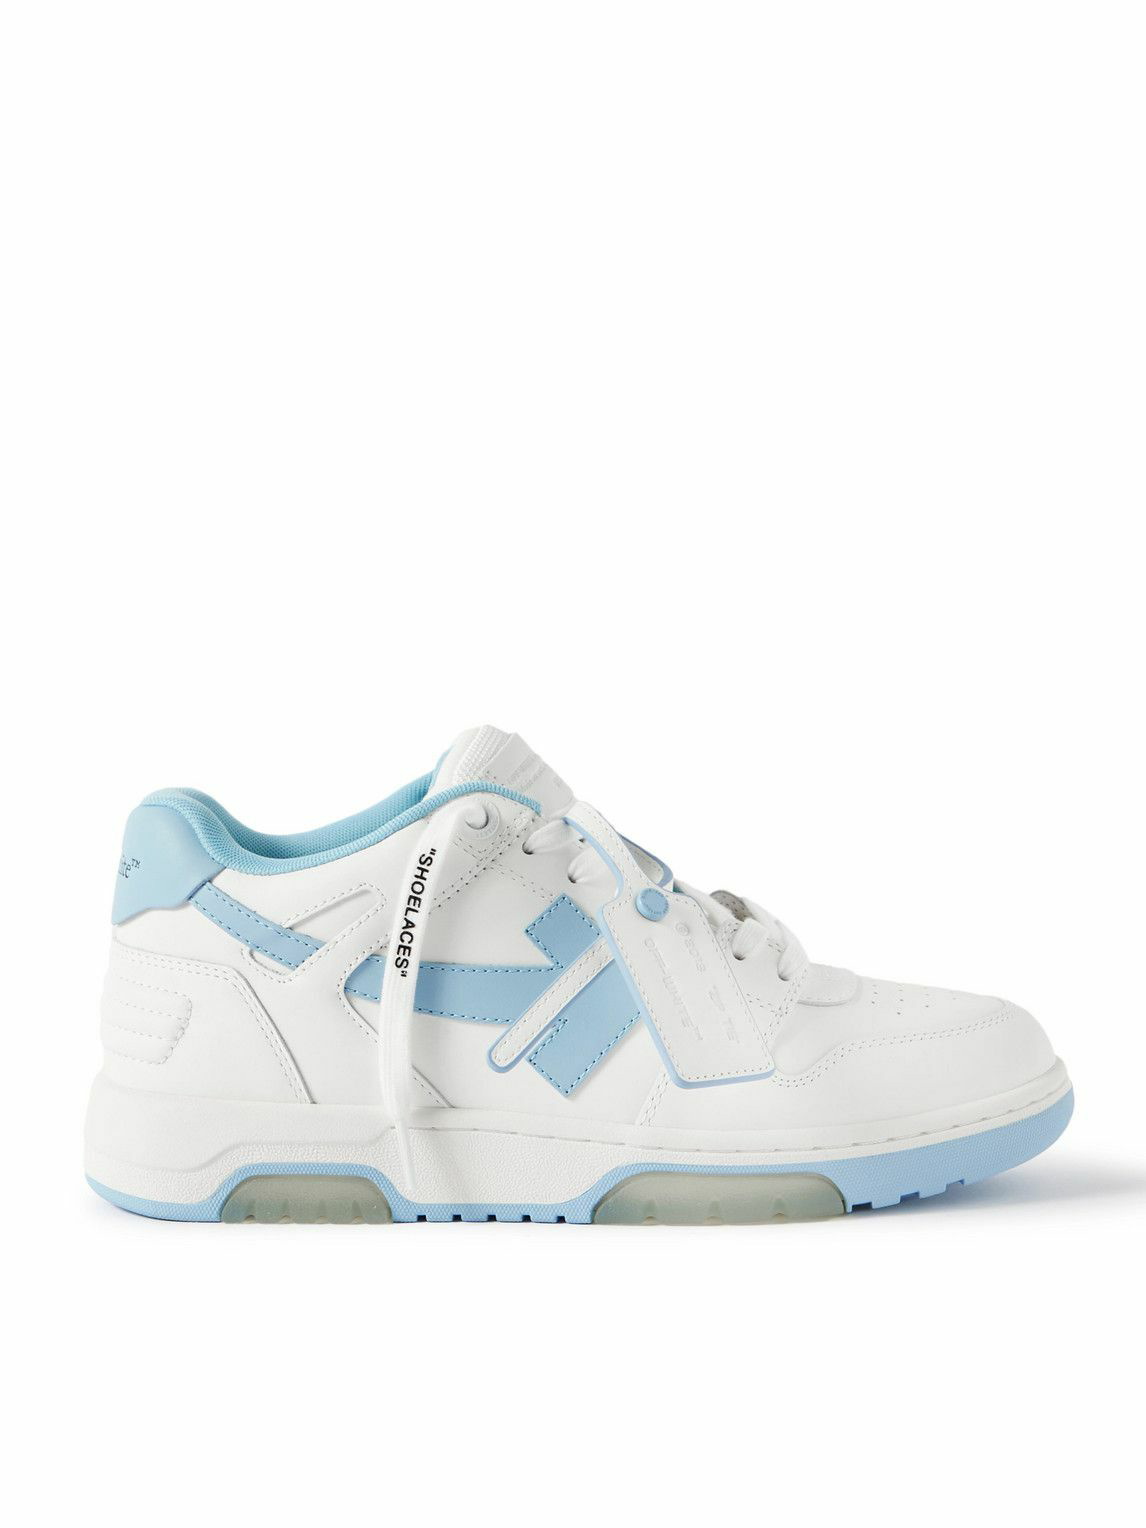 Off-White - Out of Office Leather Sneakers - White Off-White